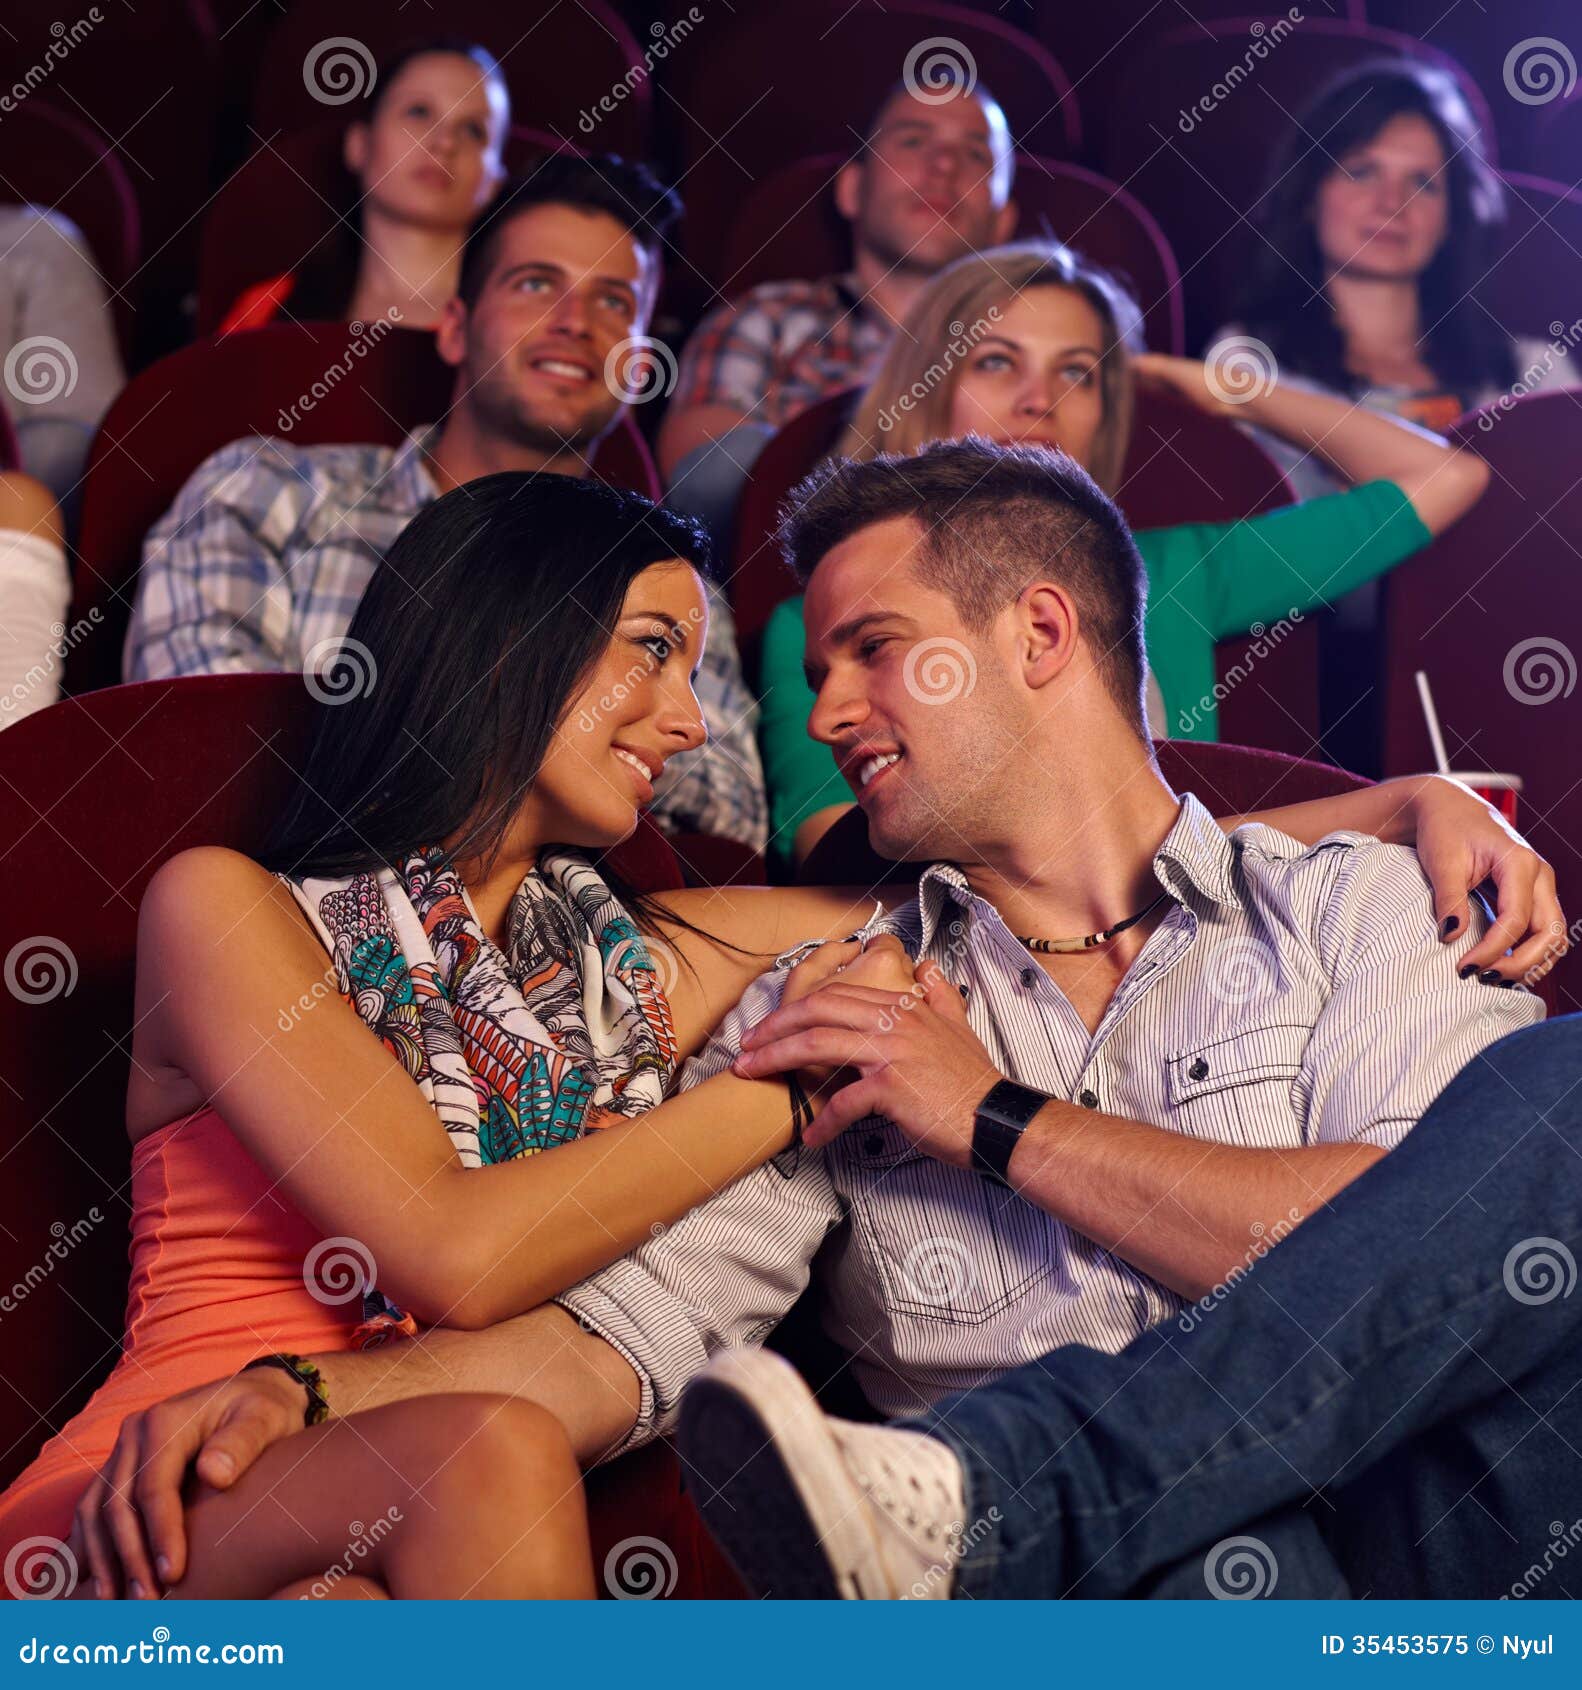 How to cuddle at the movie theater with a guy Couple Kissing Cinema Photos Free Royalty Free Stock Photos From Dreamstime